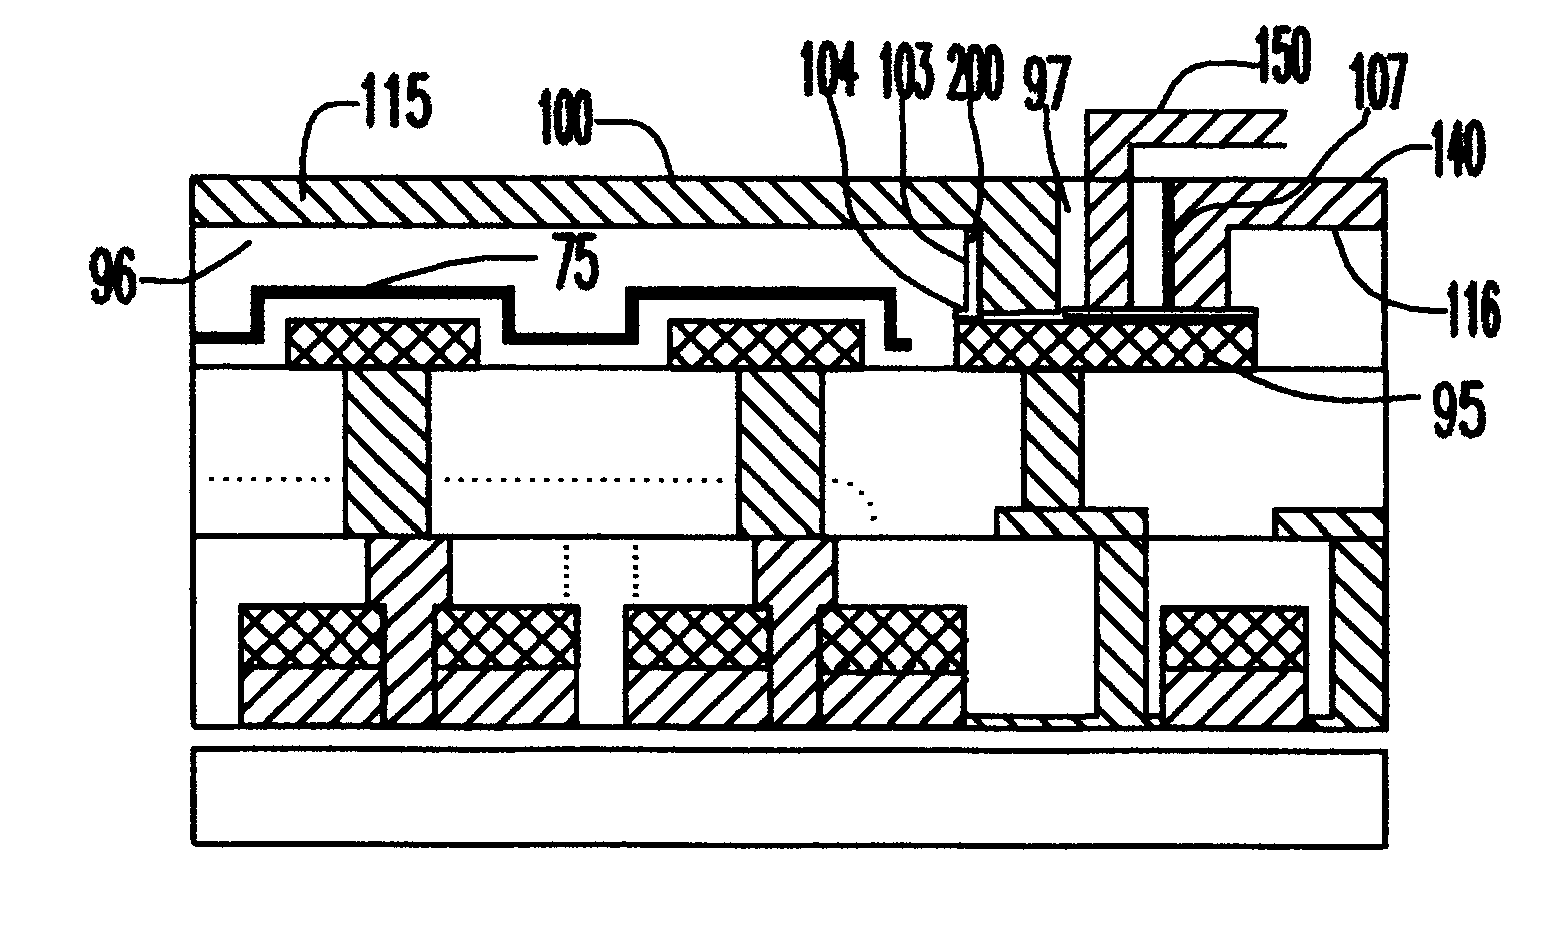 Storage-capacitor electrode and interconnect